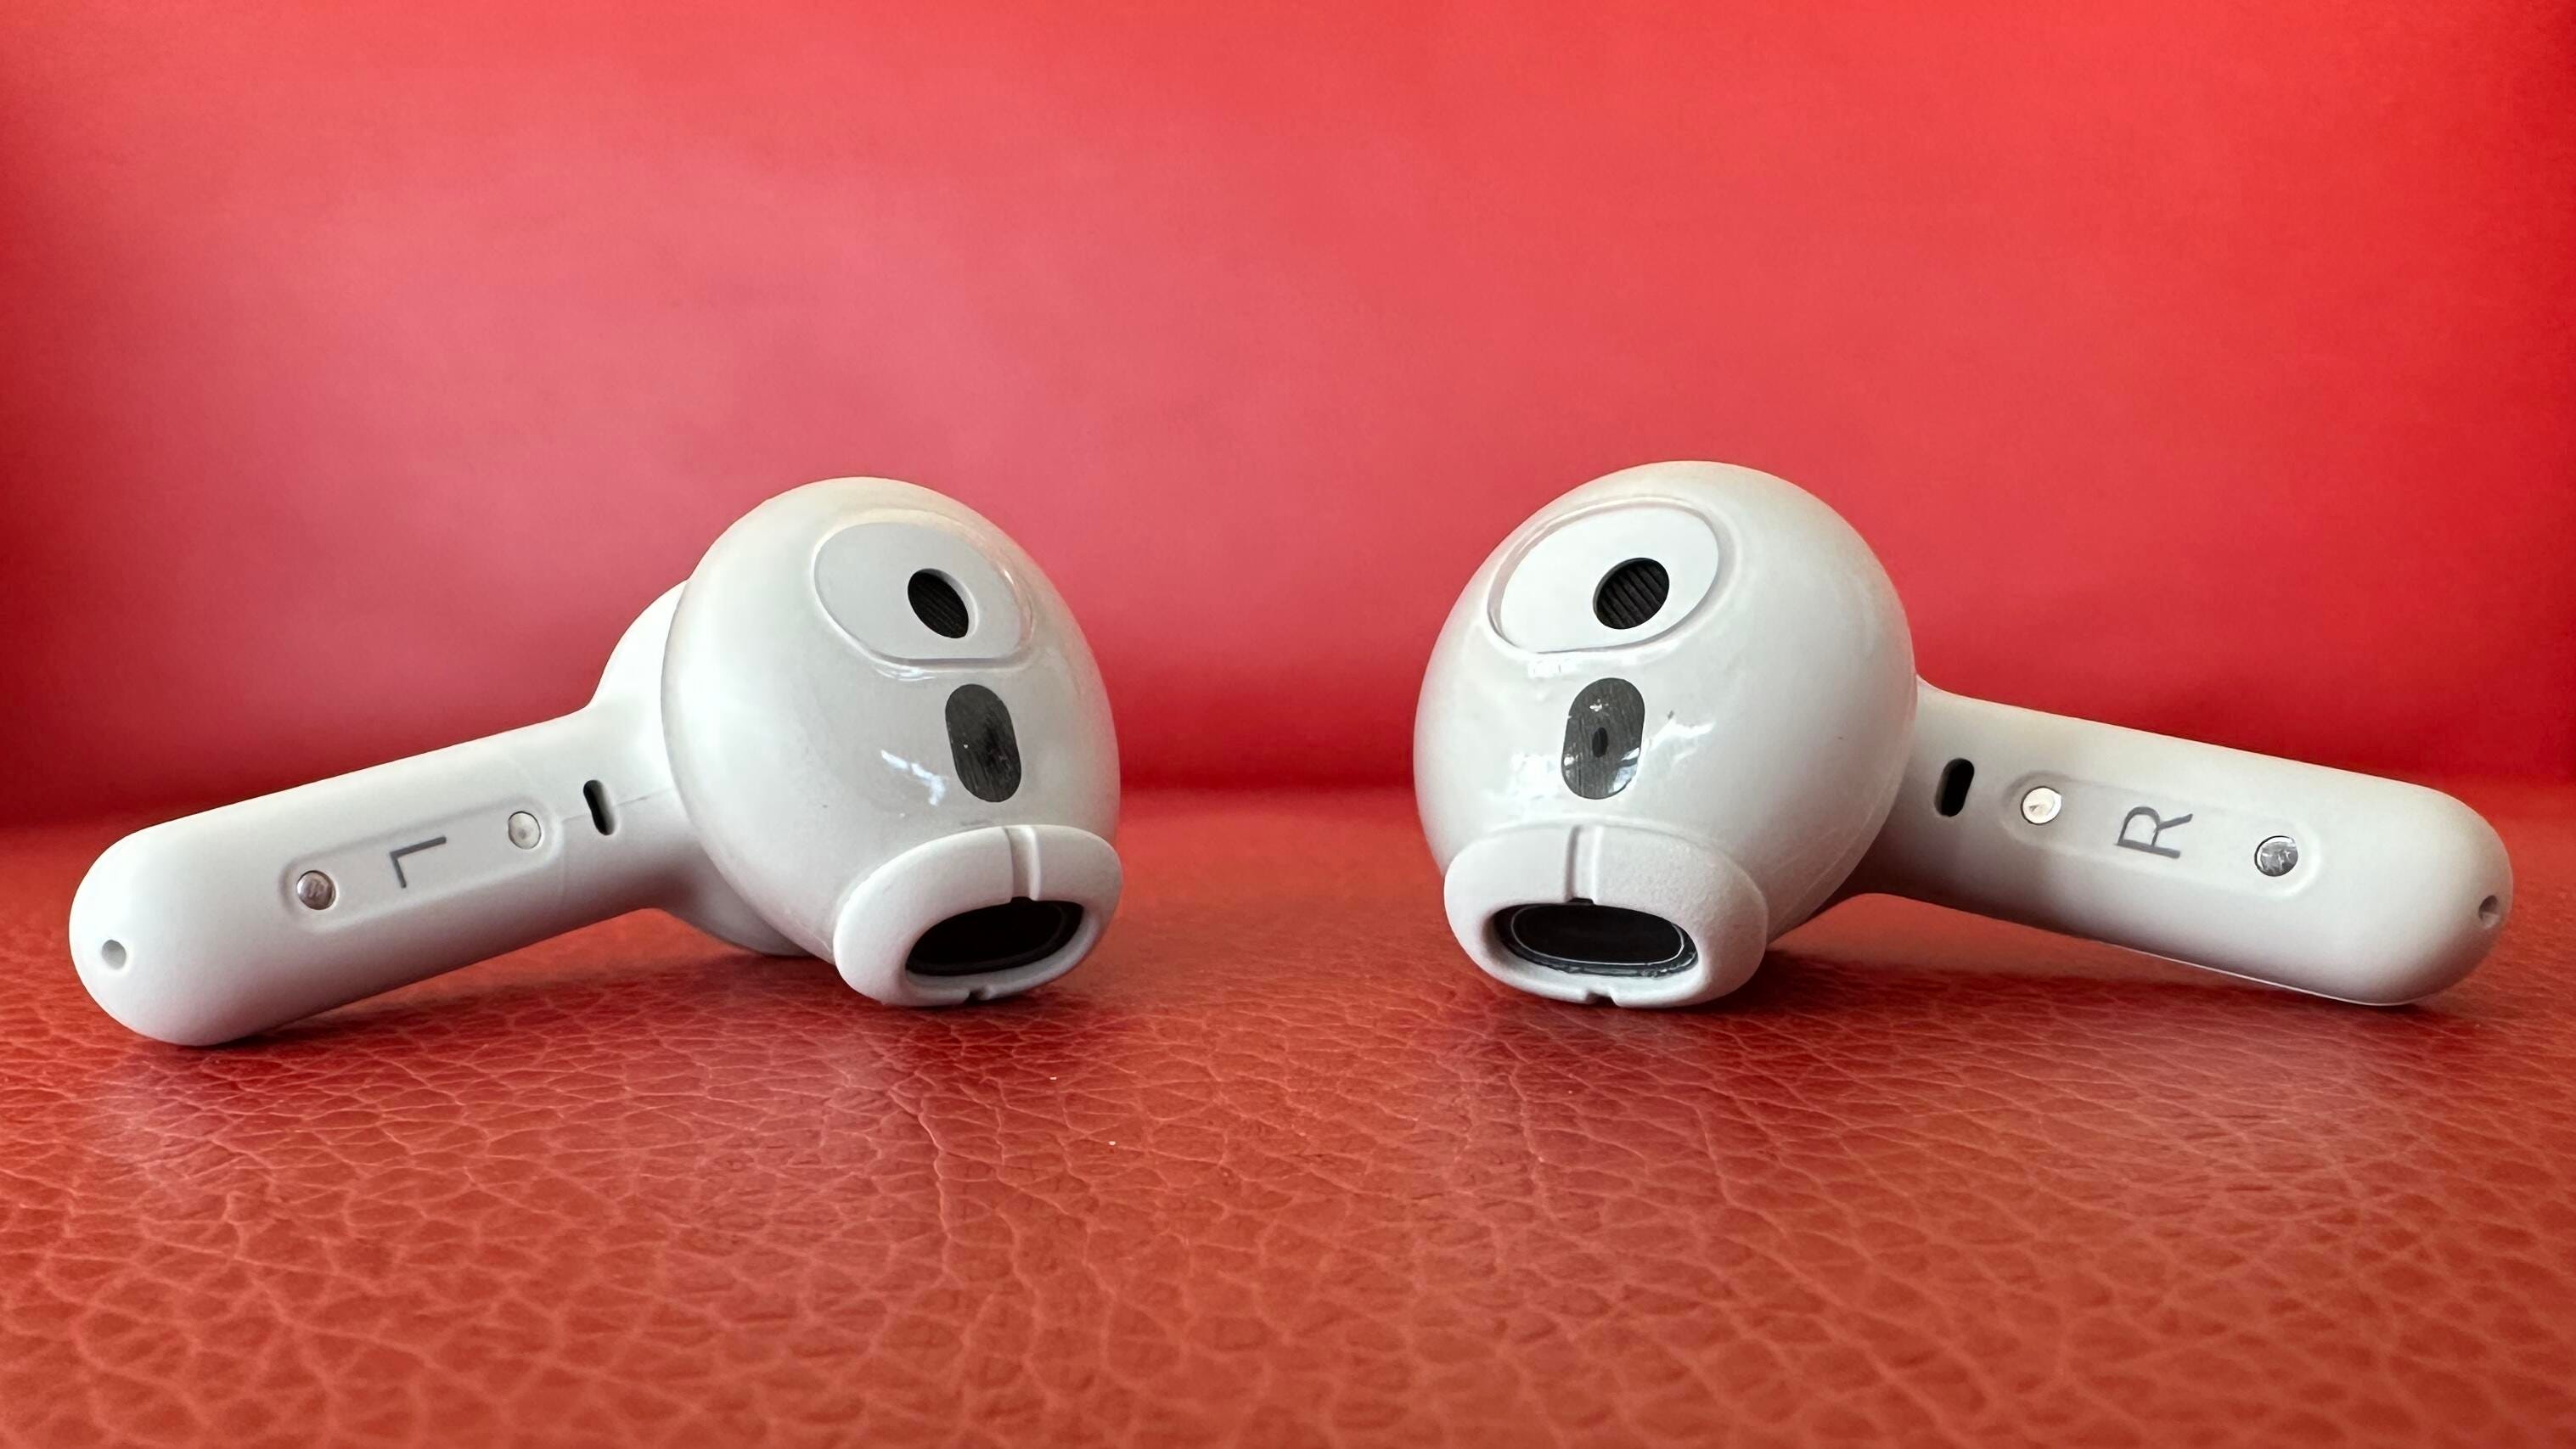 3 things that make me think the AirPods 3 aren't such a great value after  all - CNET